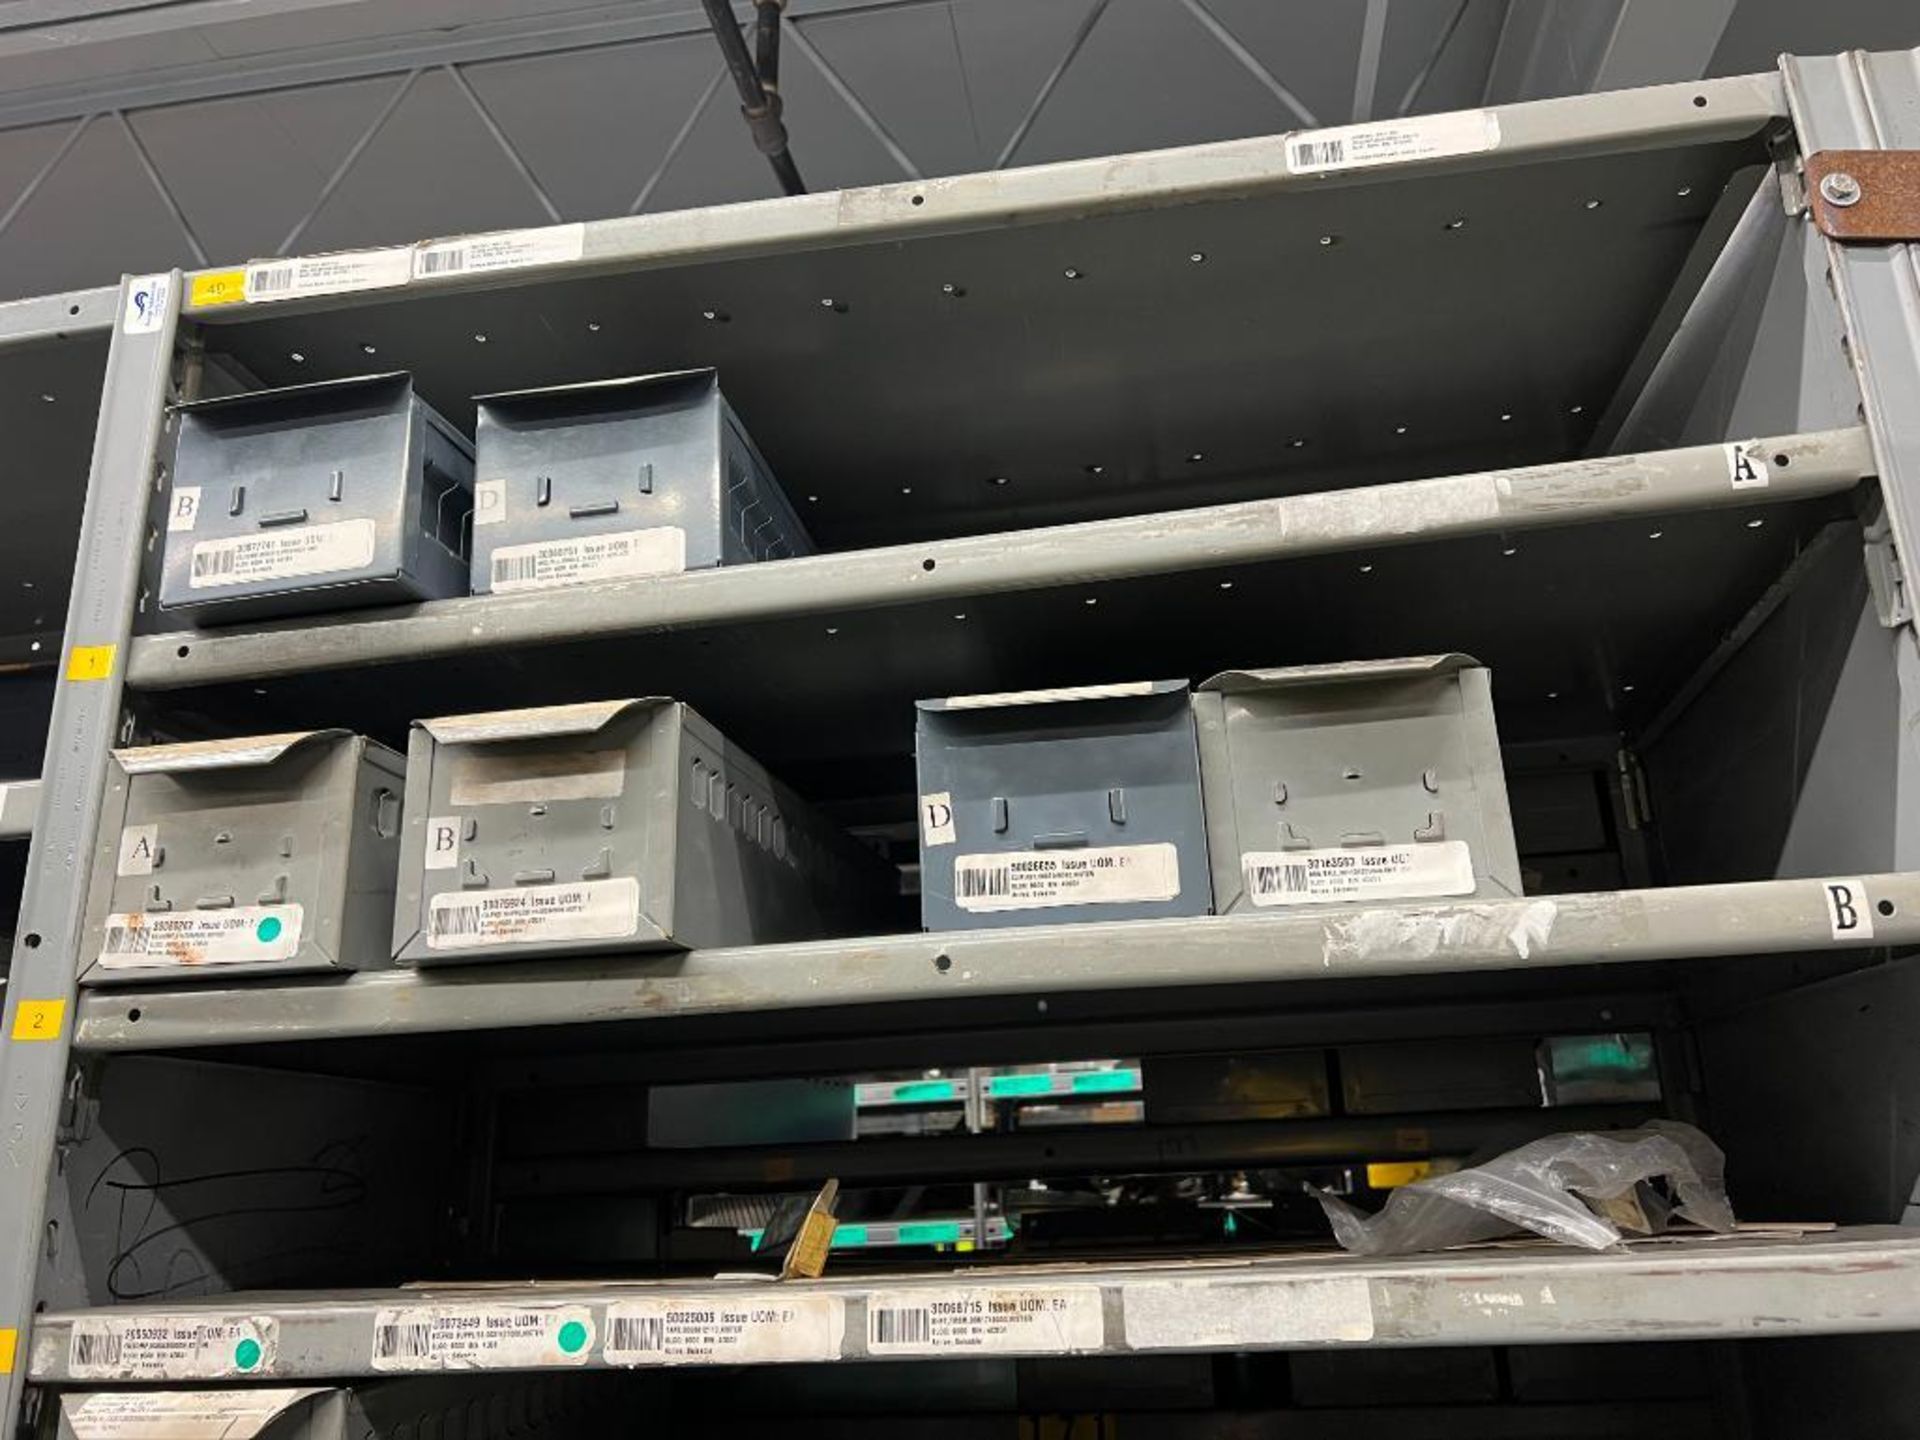 contents of gray shelving units to include, bearings, shafts, filters, fuses, pneumatic scale parts, - Image 58 of 141